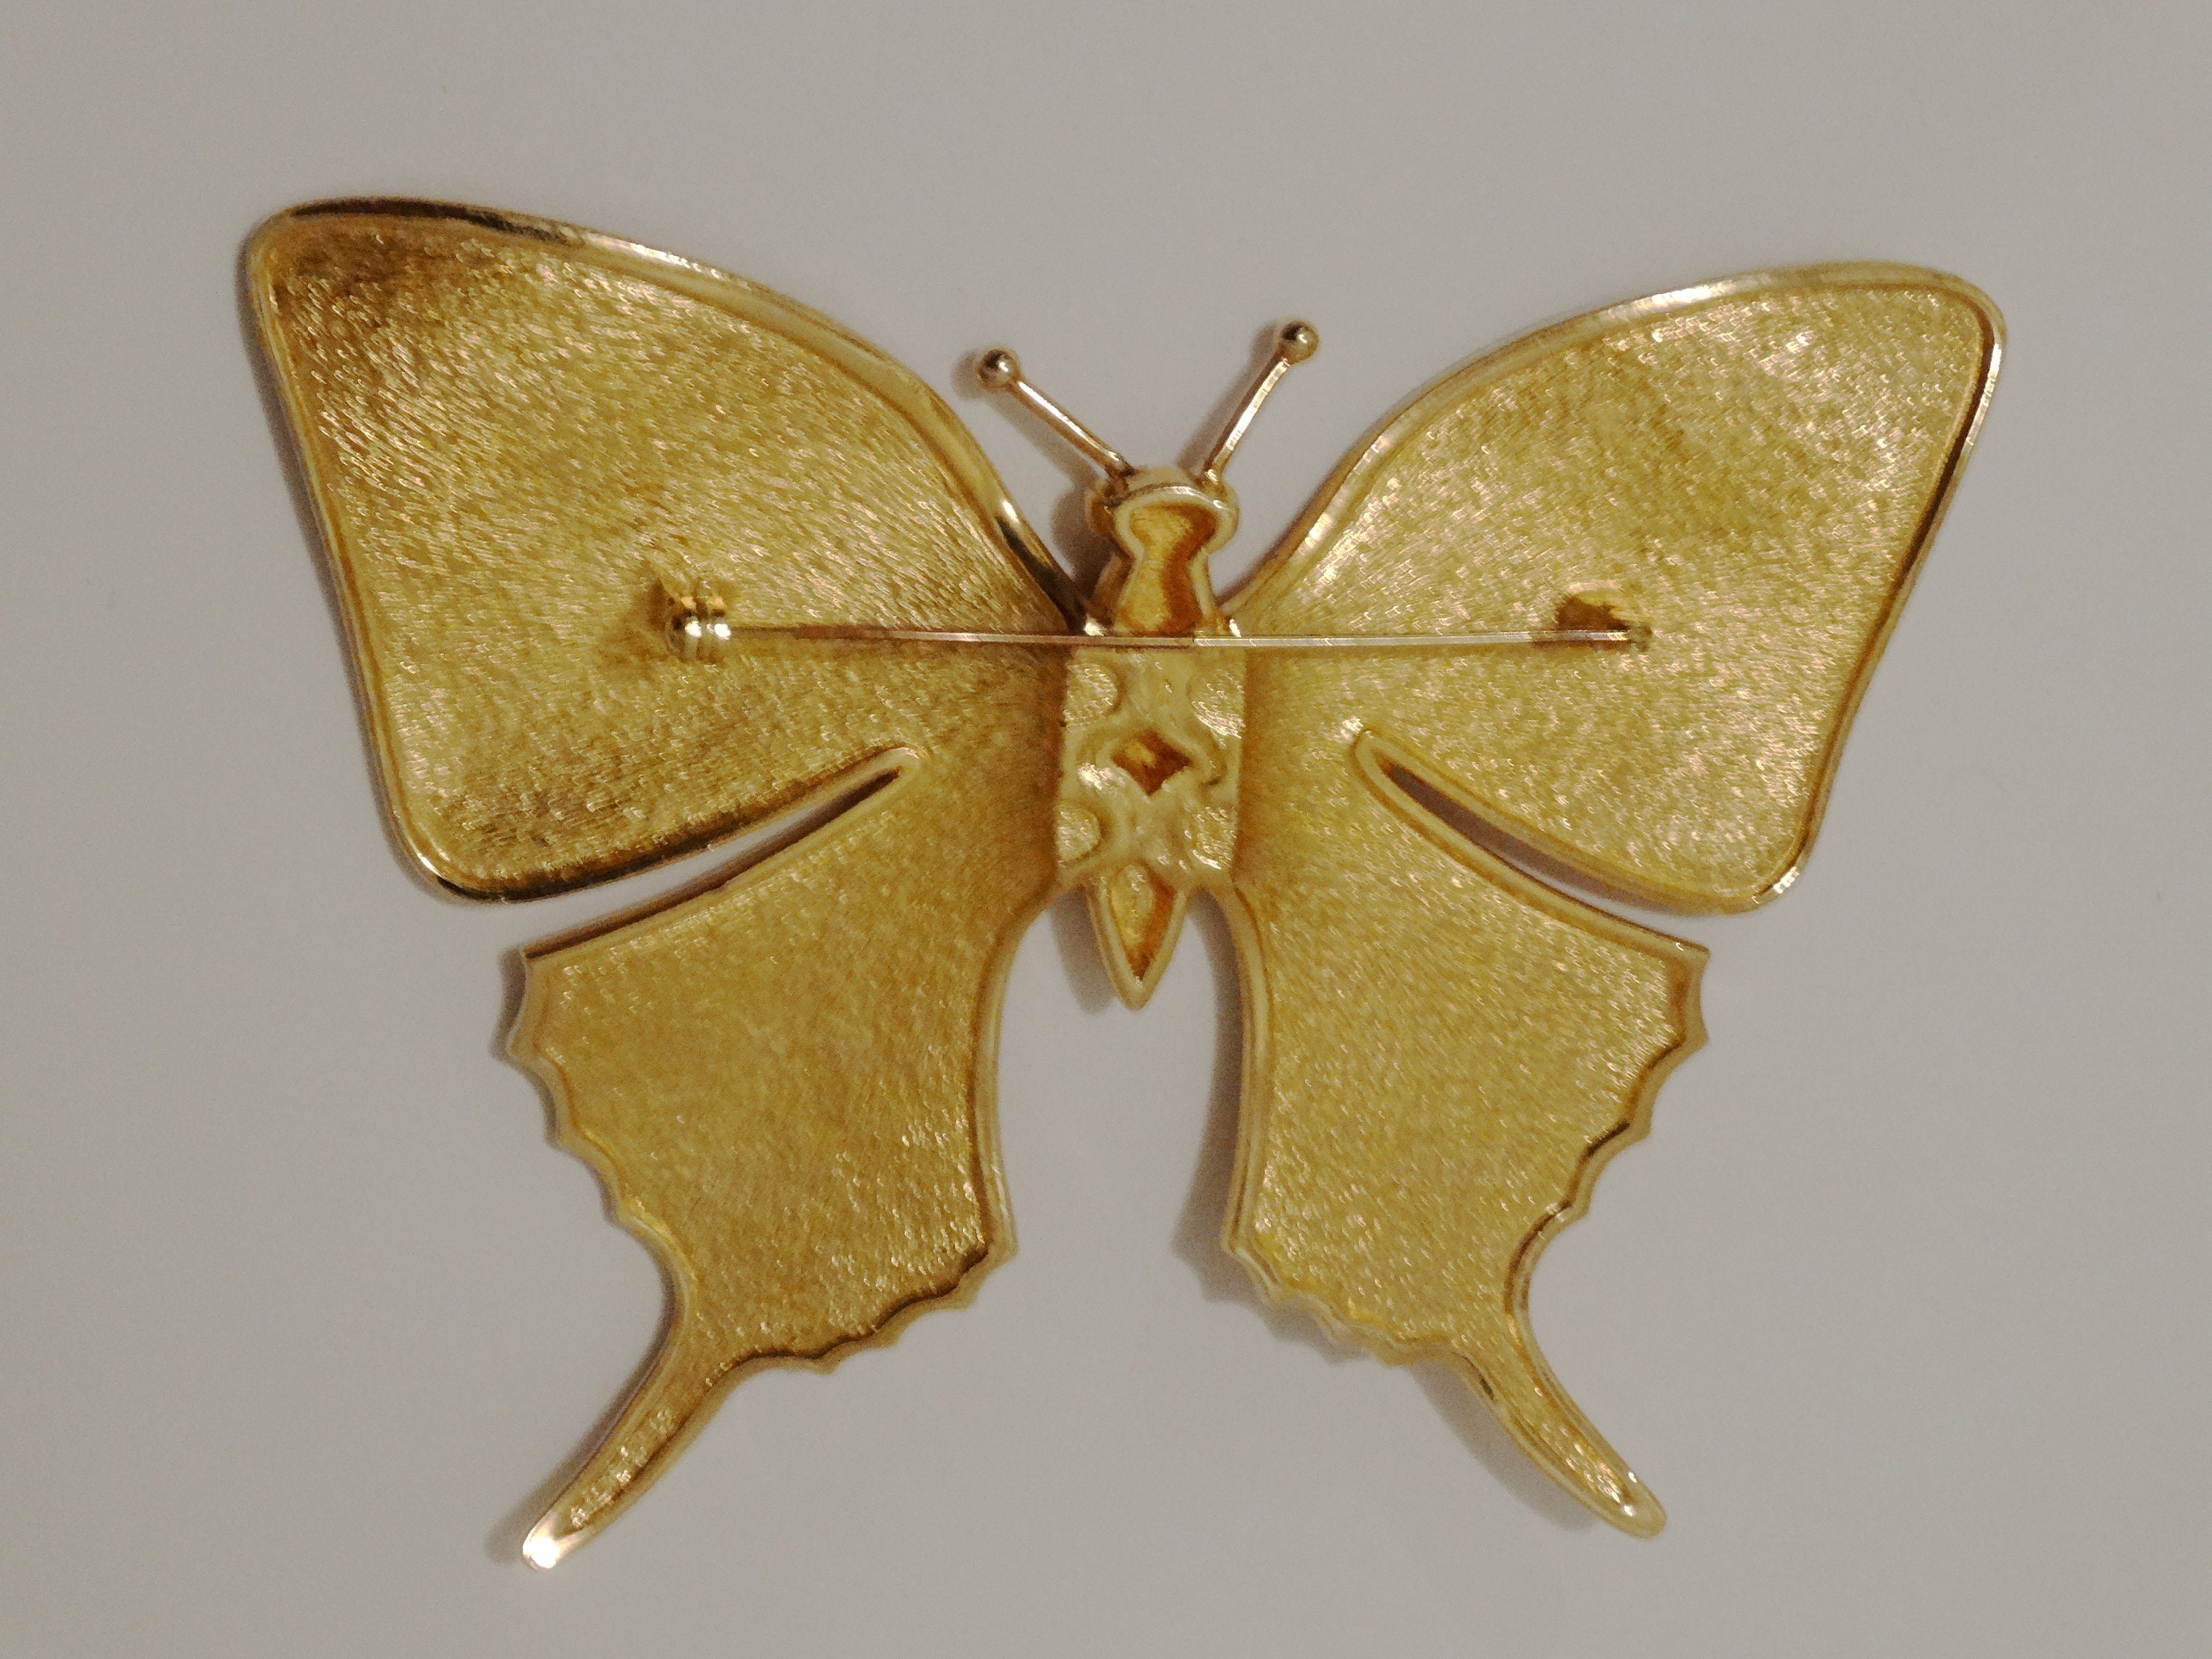 Christian Dior 1980s Enameled Butterfly Money Clip Brooch